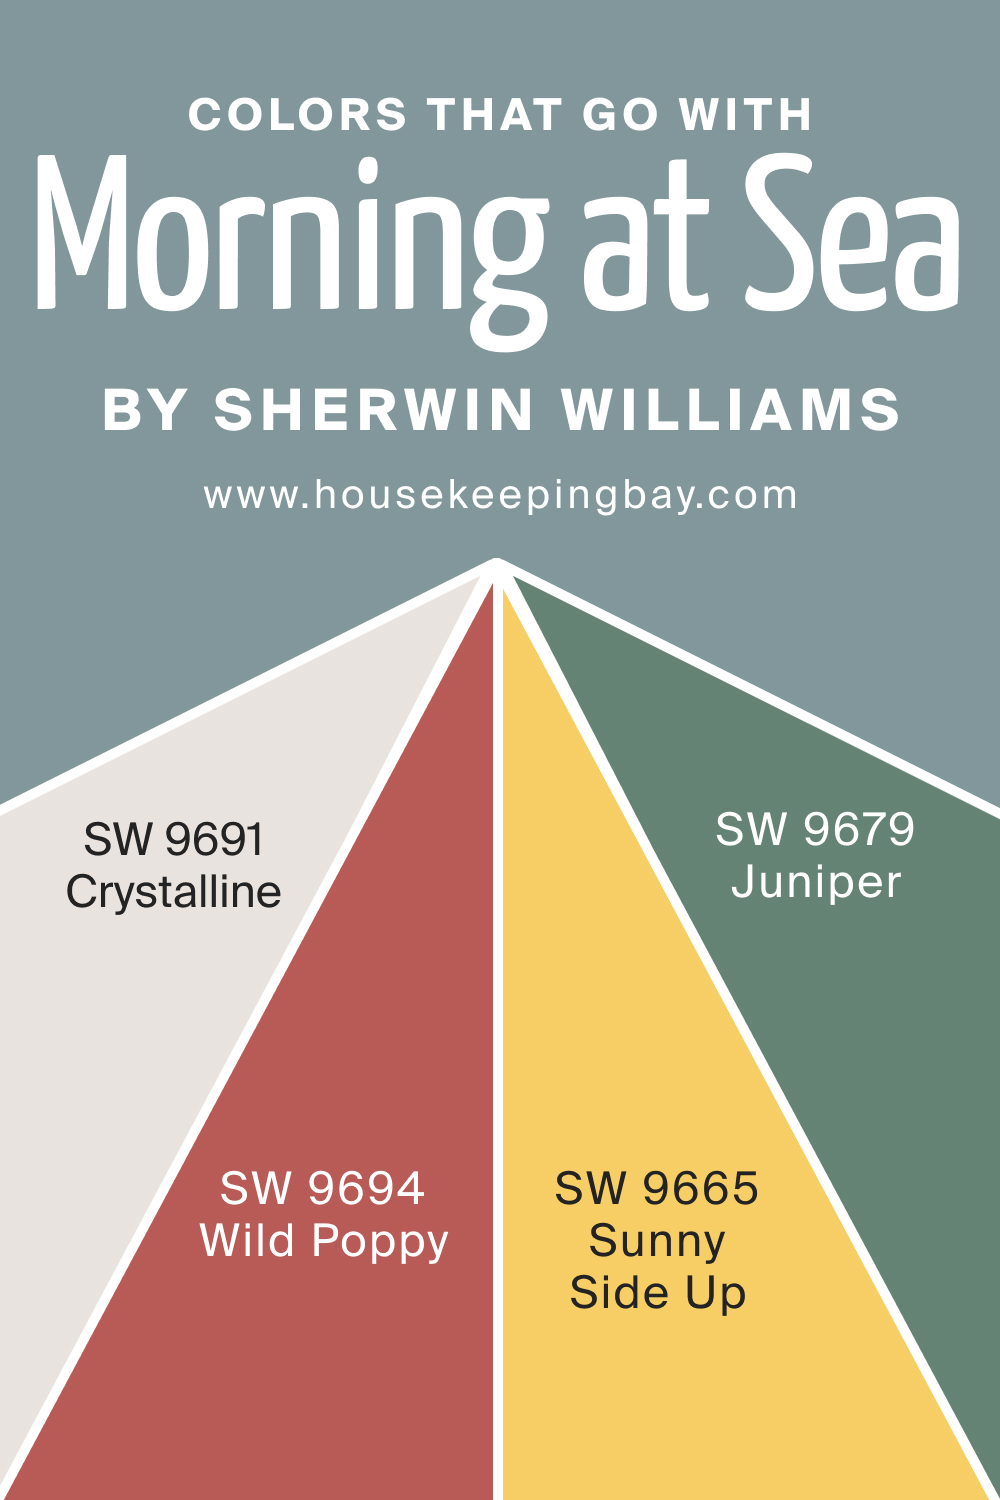 Colors that goes with SW 9634 Morning at Sea by Sherwin Williams